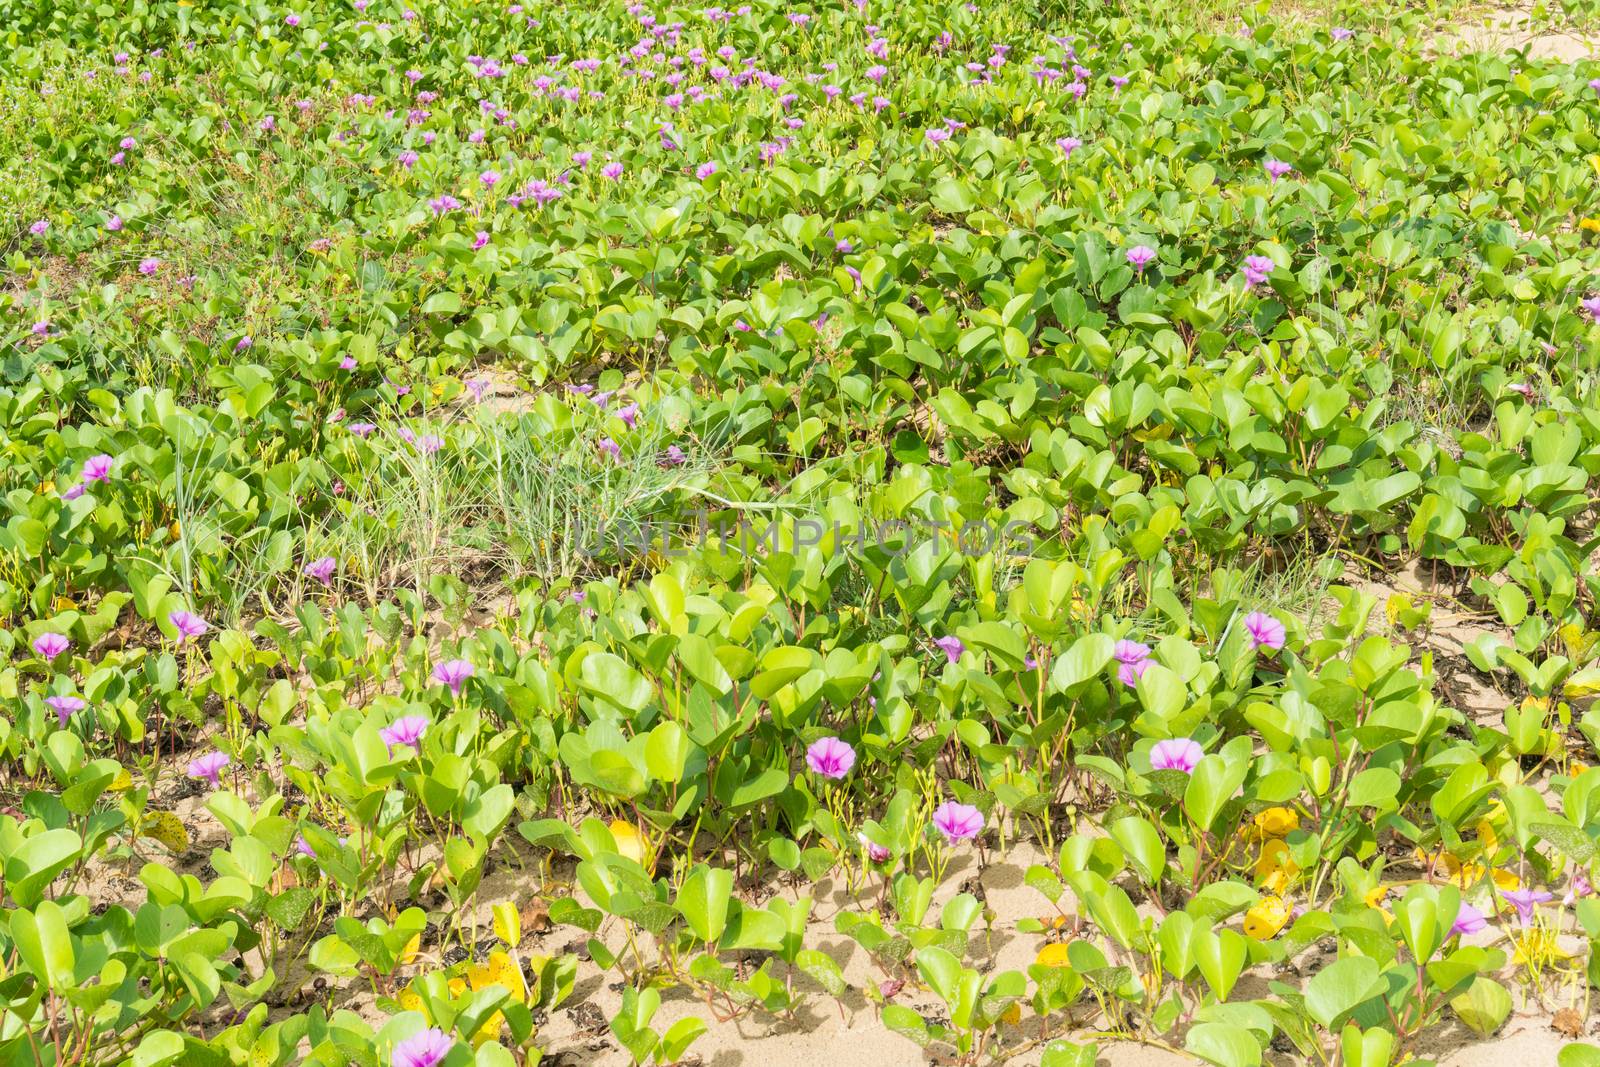 Beach Morning Glory or Goat's Foot Creeper texture background on the beach. Natural beach morning glory or Goat's foot creeper